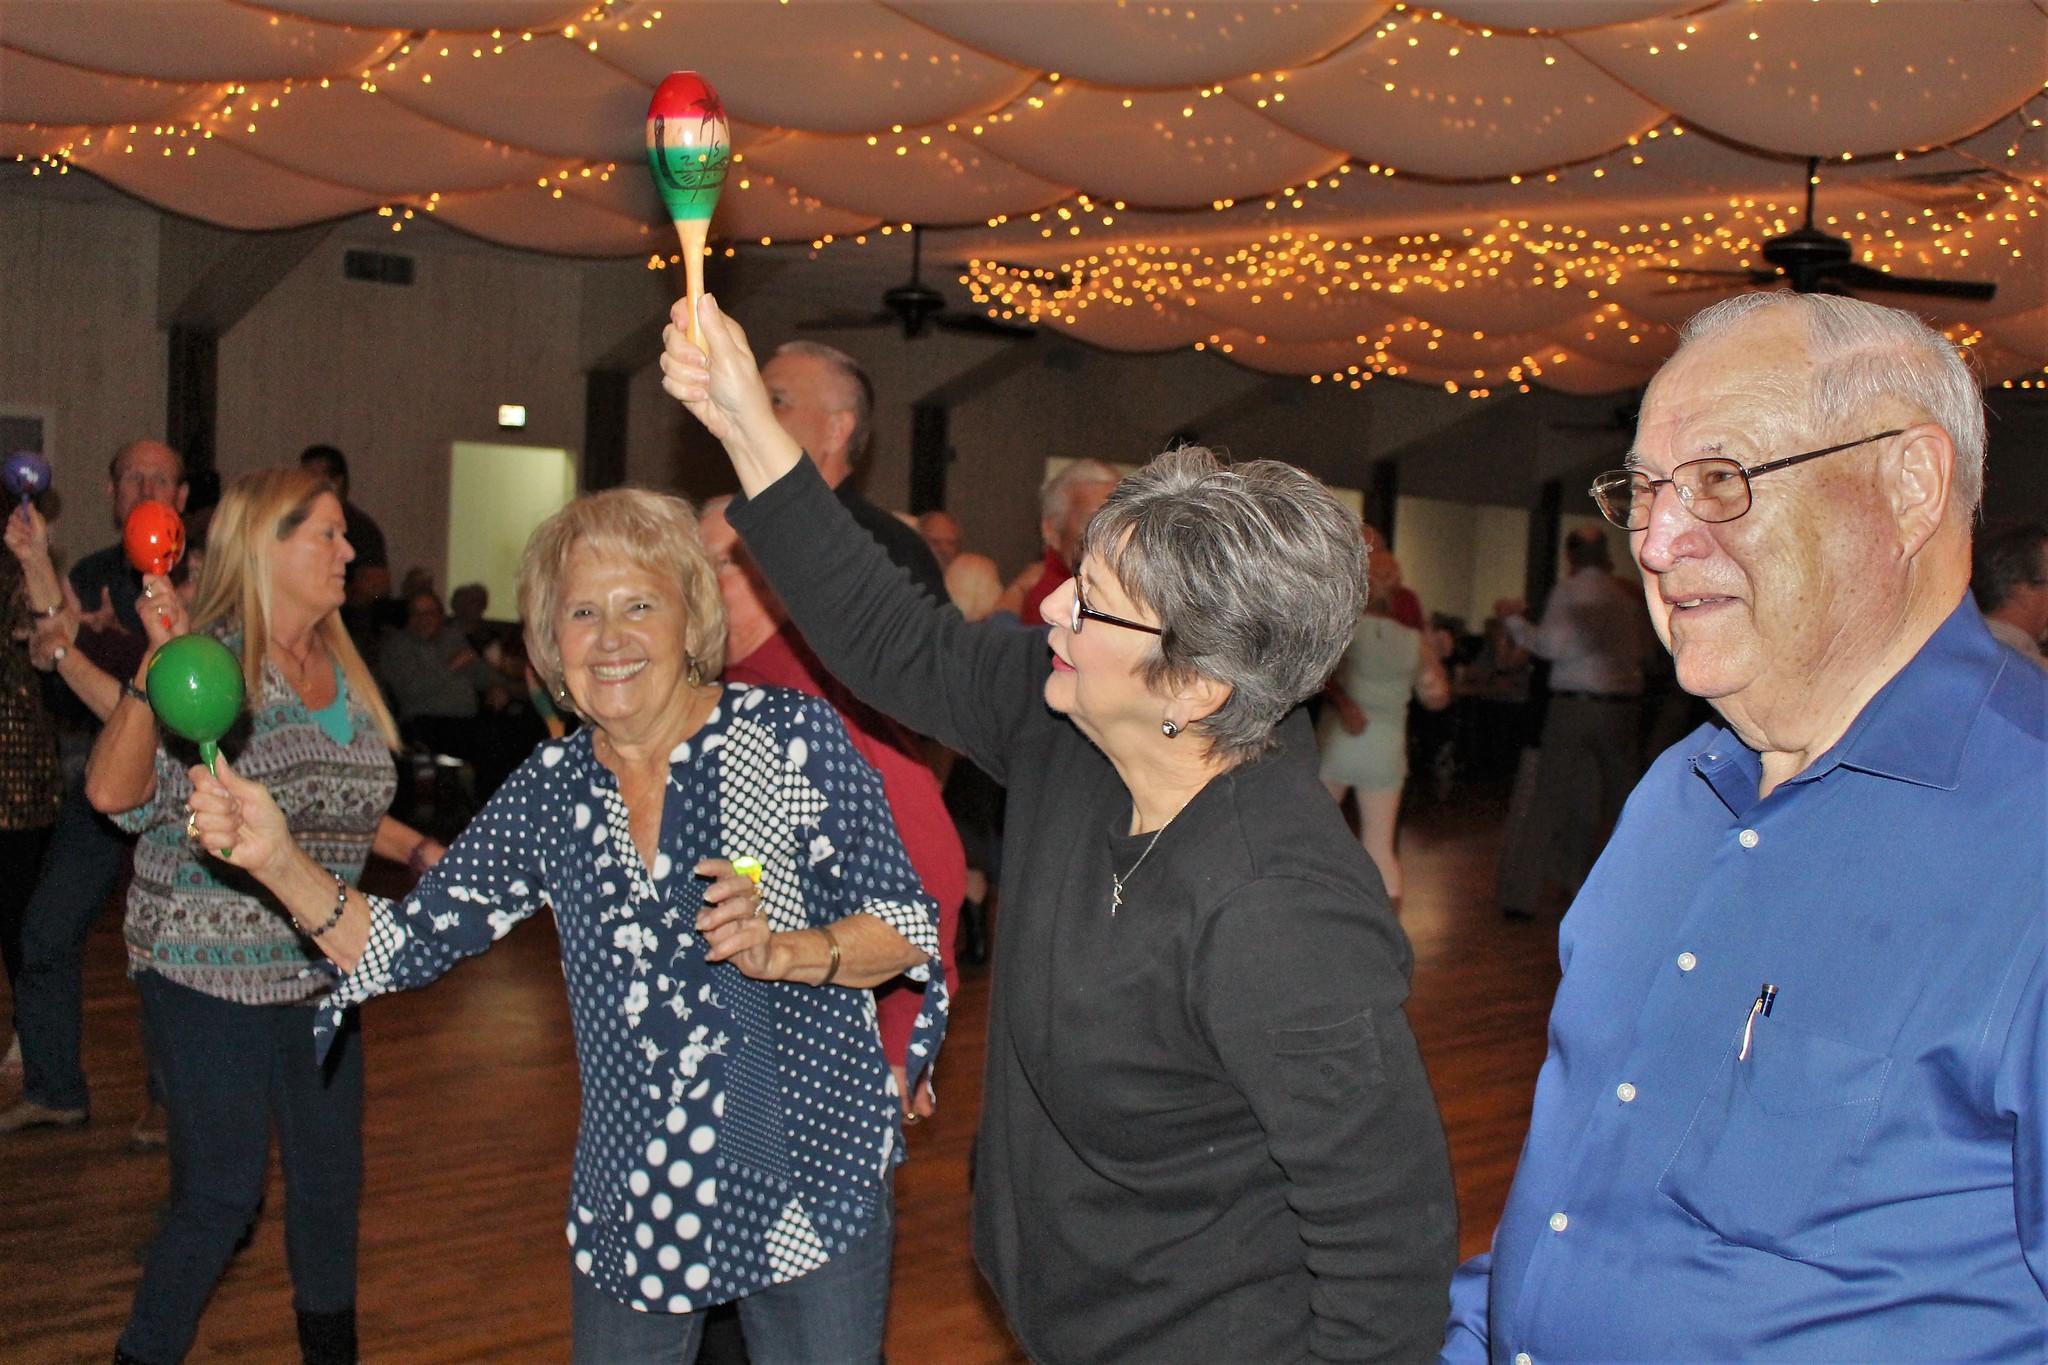 Swiss Alp Dance Club: 85 Years Old and Still Dancing